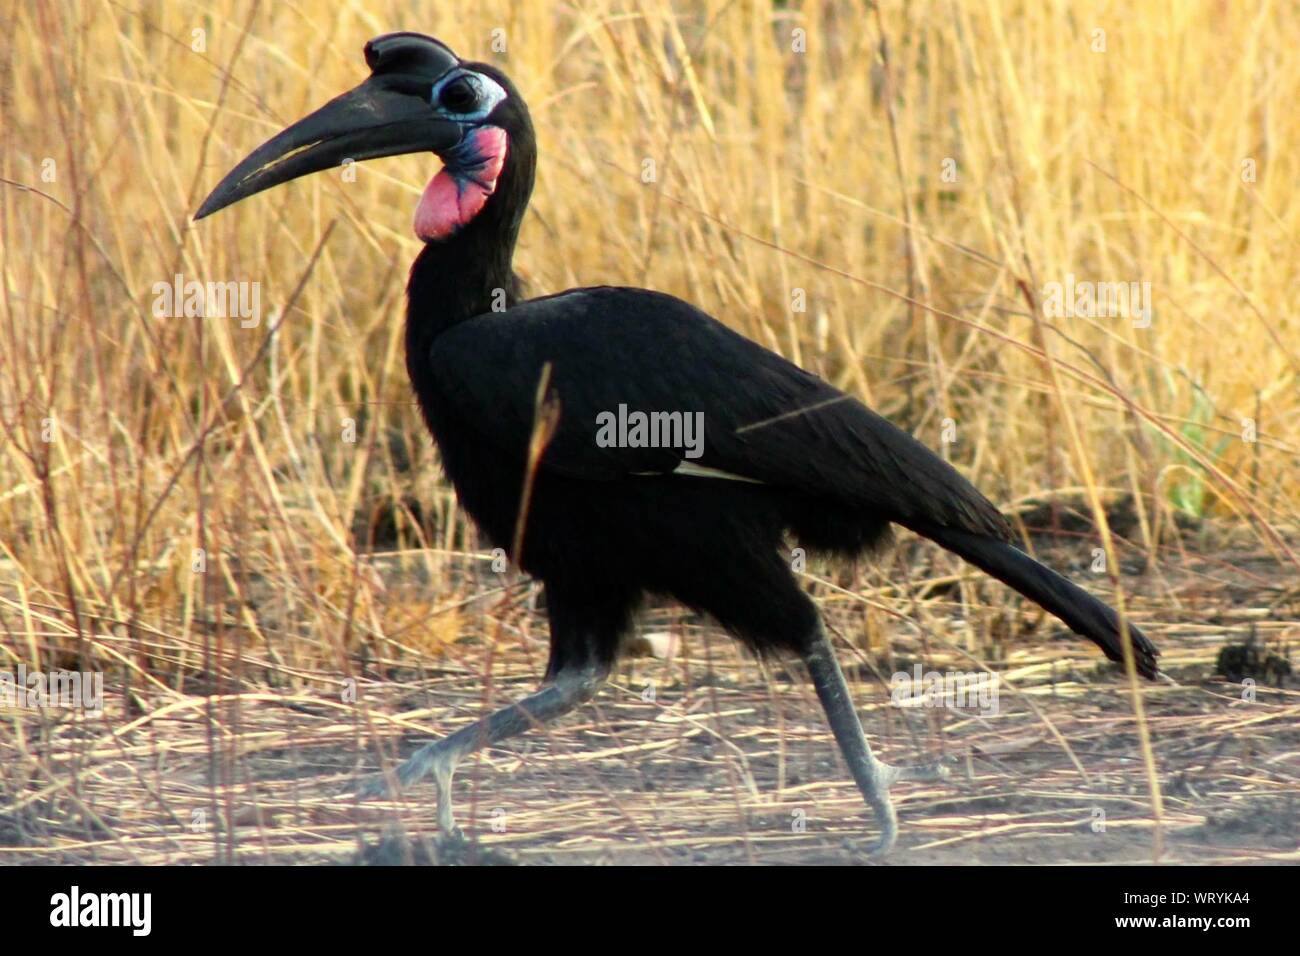 Abyssinian Ground Hornbill By Plants Stock Photo